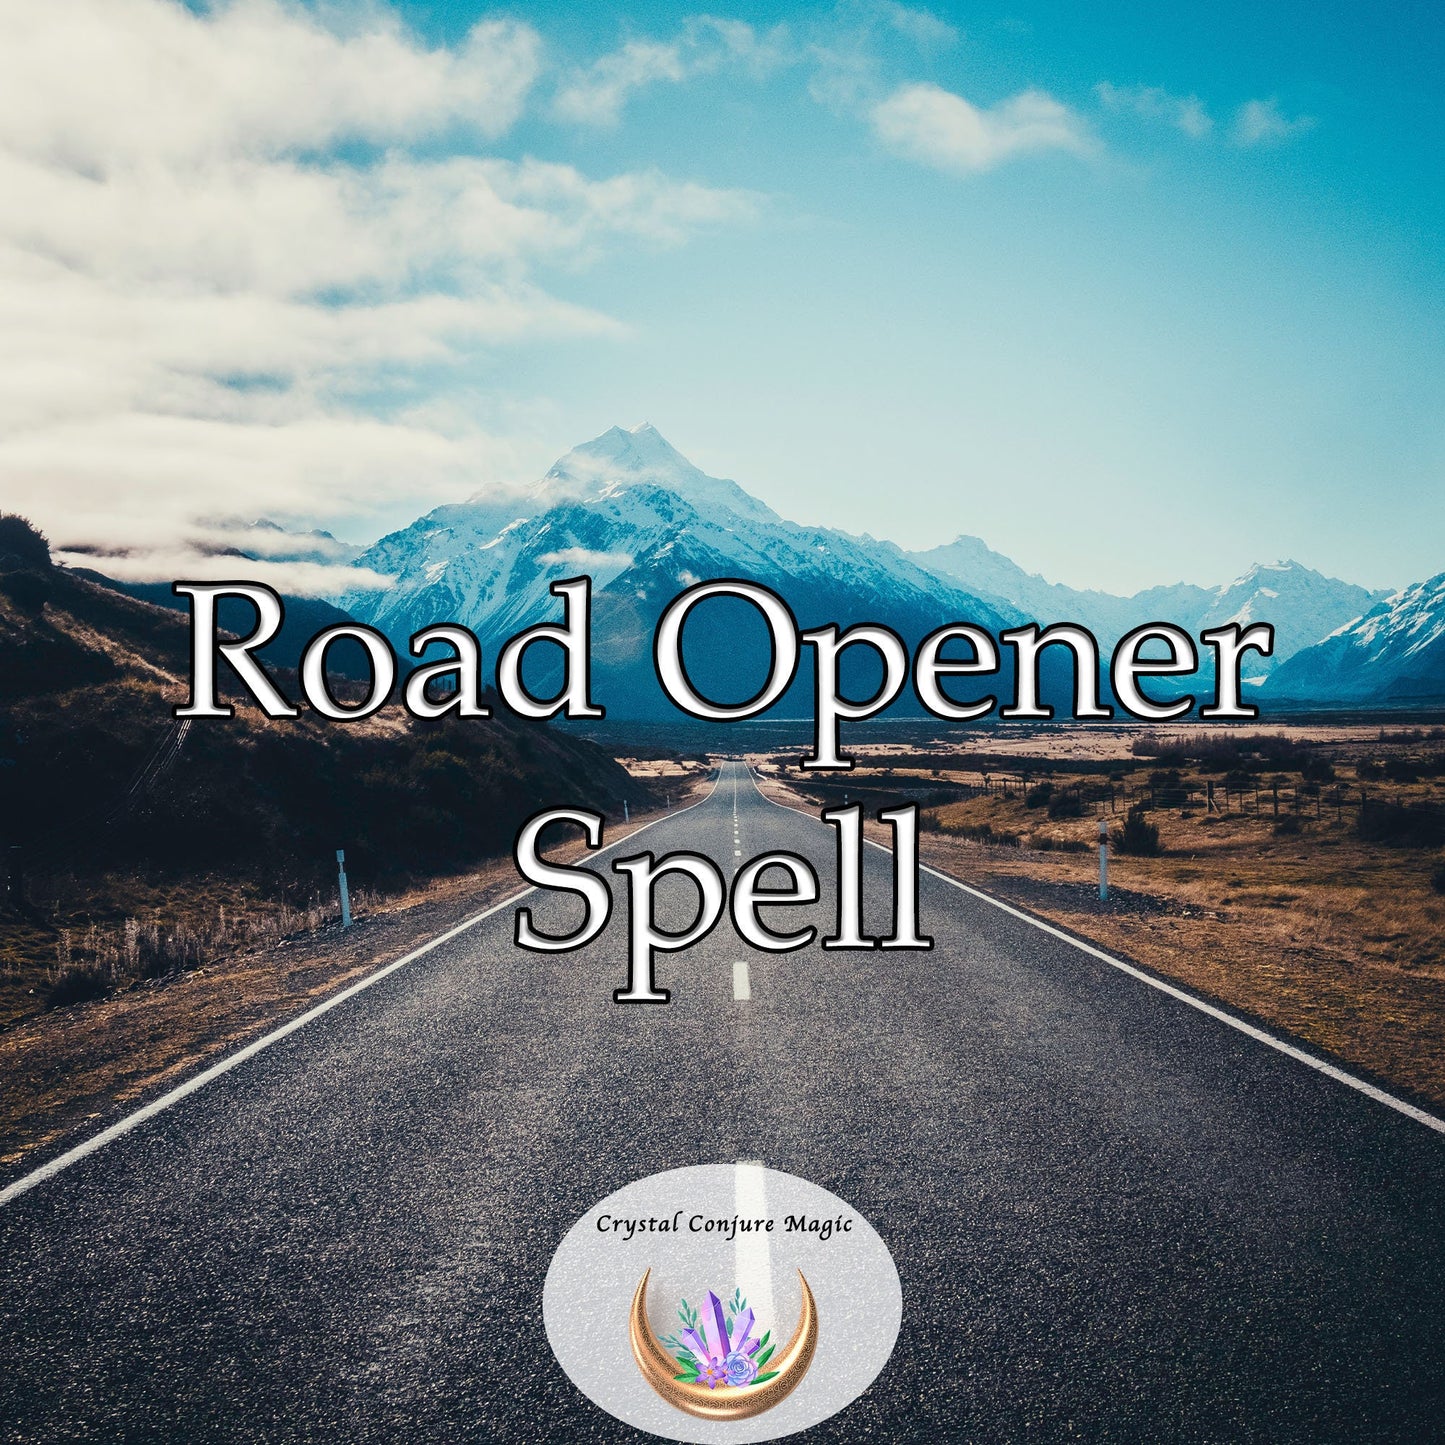 Road Opener  Spell - Remove the worries, obstacles and difficulties blocking your path to your dreams and goals